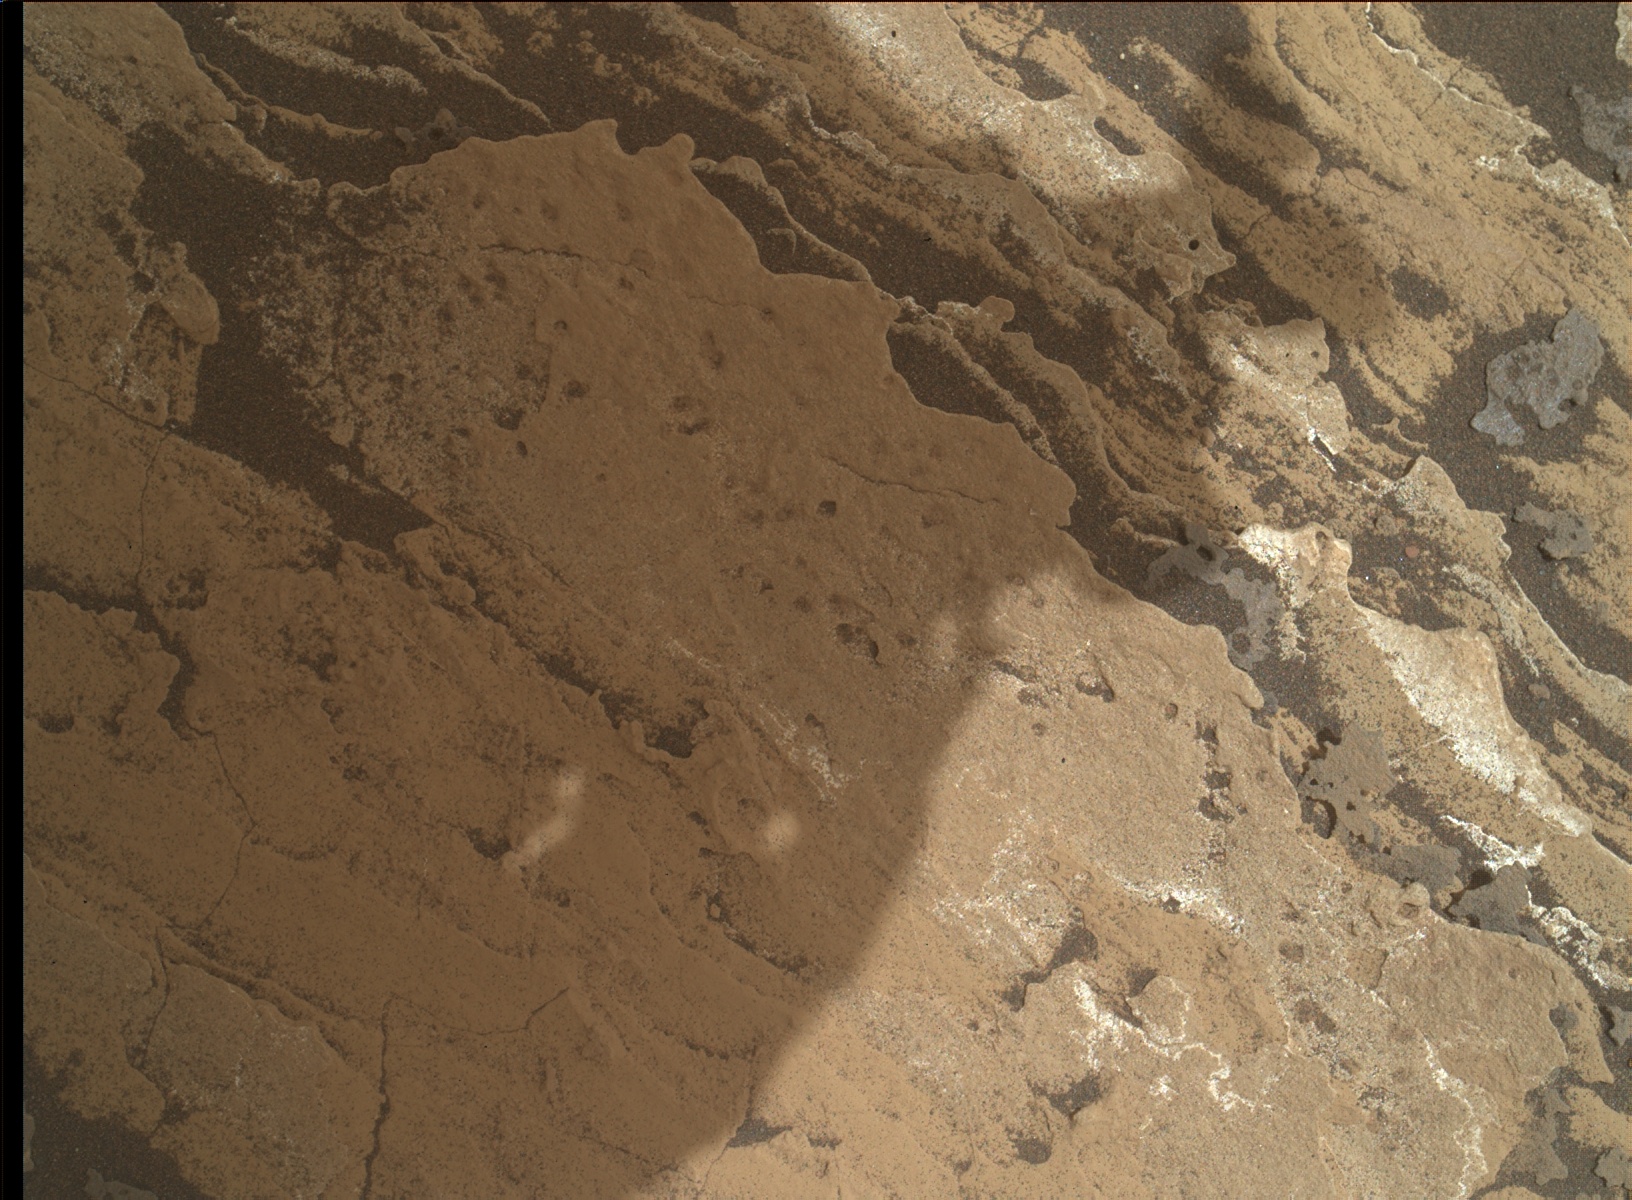 Nasa's Mars rover Curiosity acquired this image using its Mars Hand Lens Imager (MAHLI) on Sol 1685